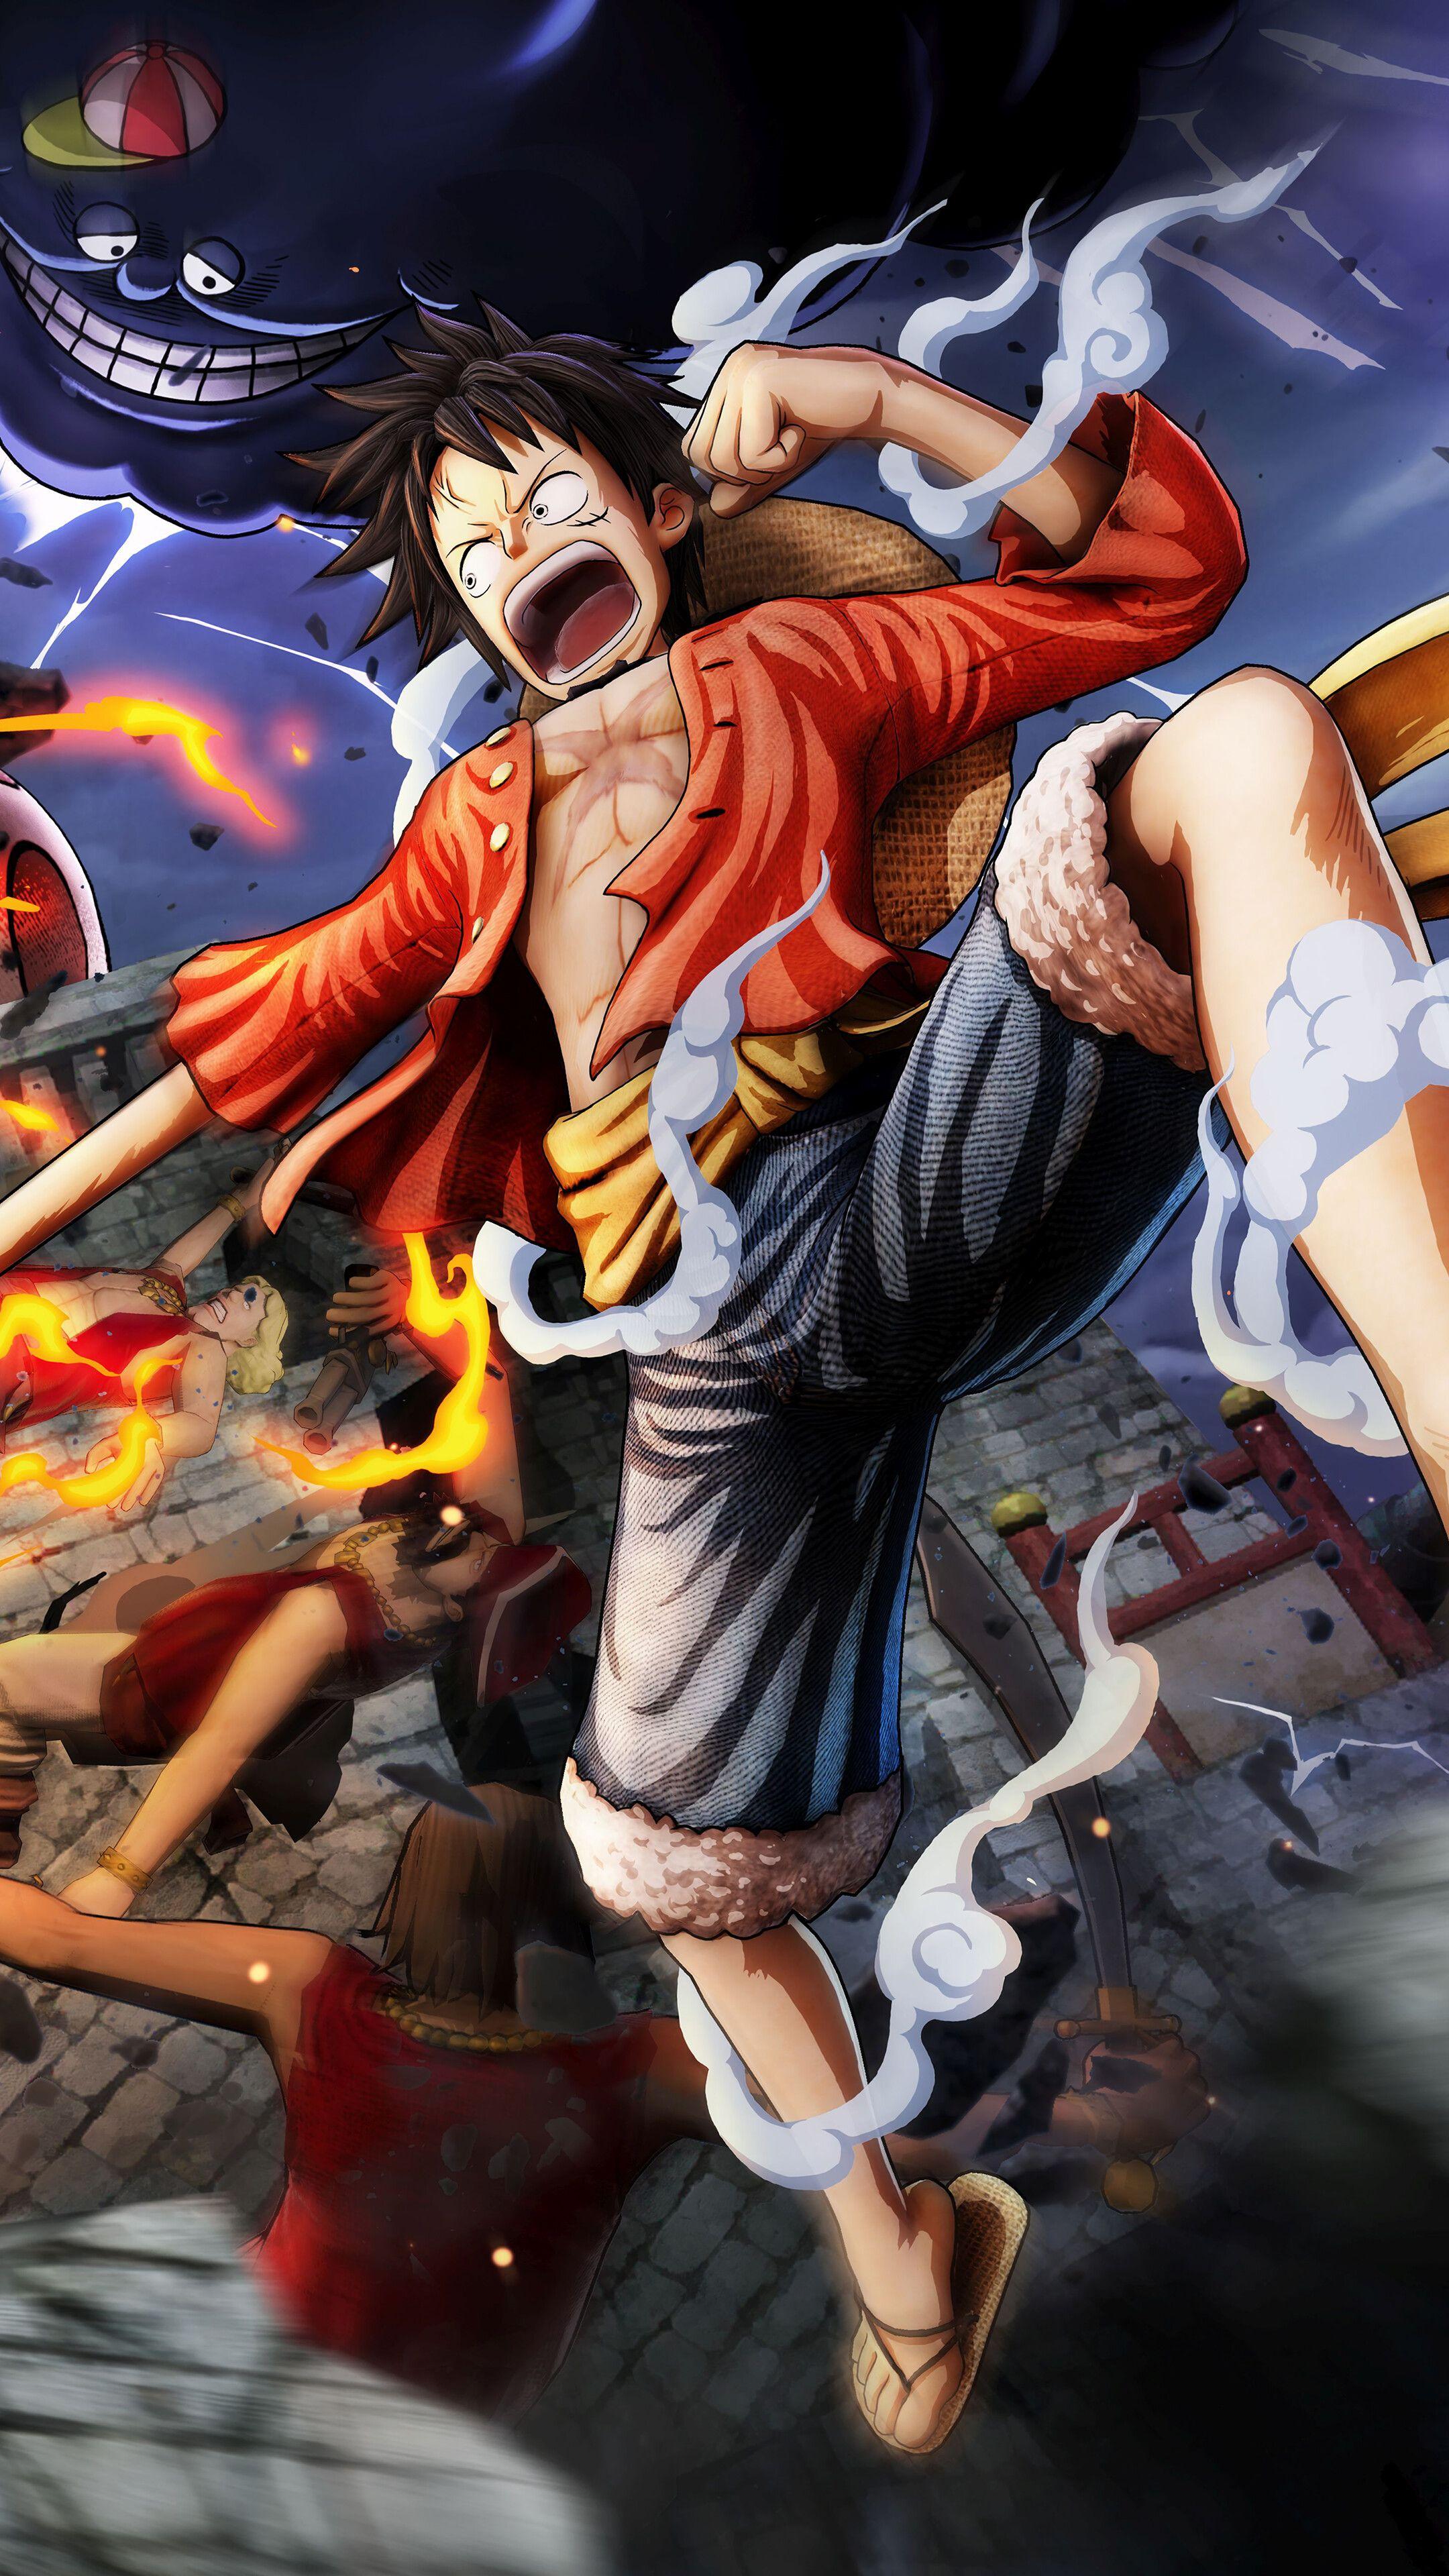 One Piece Wano 4K Wallpapers - Top Free One Piece Wano 4K Backgrounds